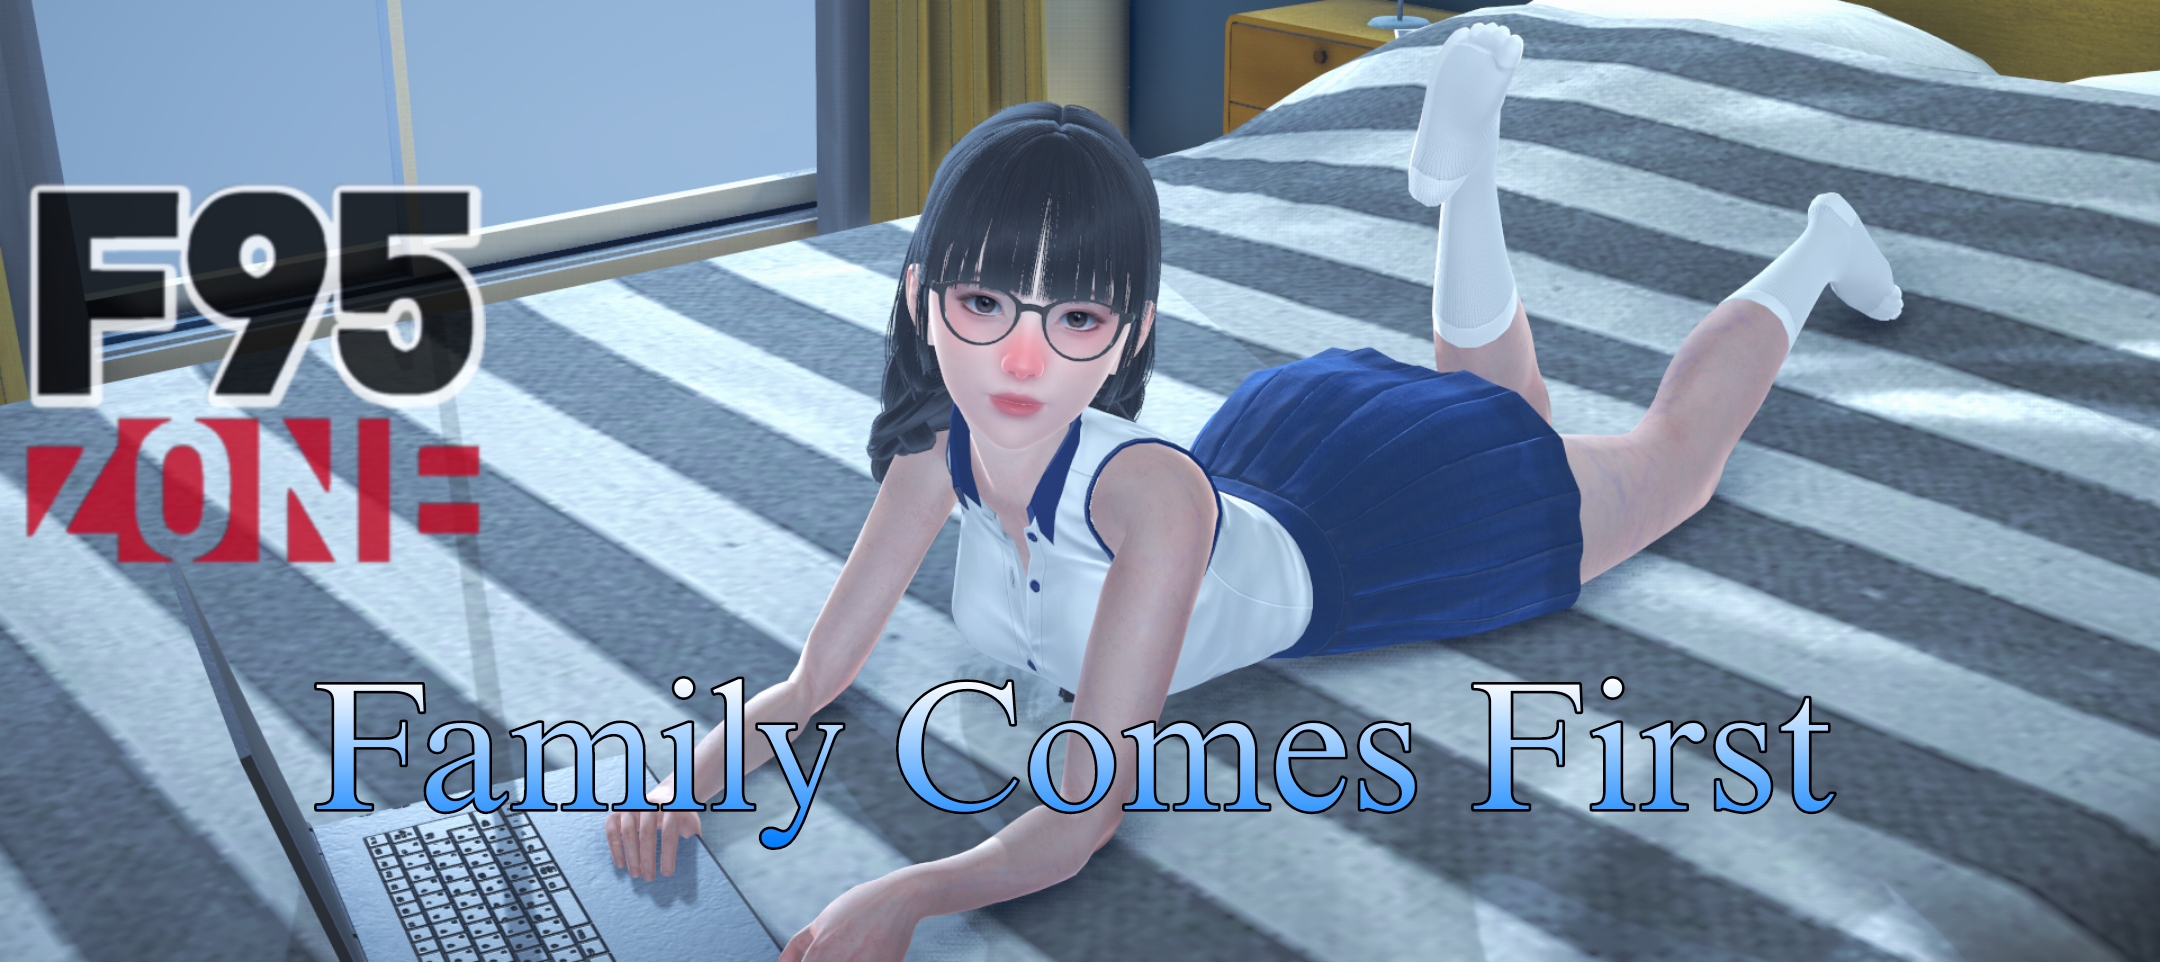 Family Comes First1.jpg